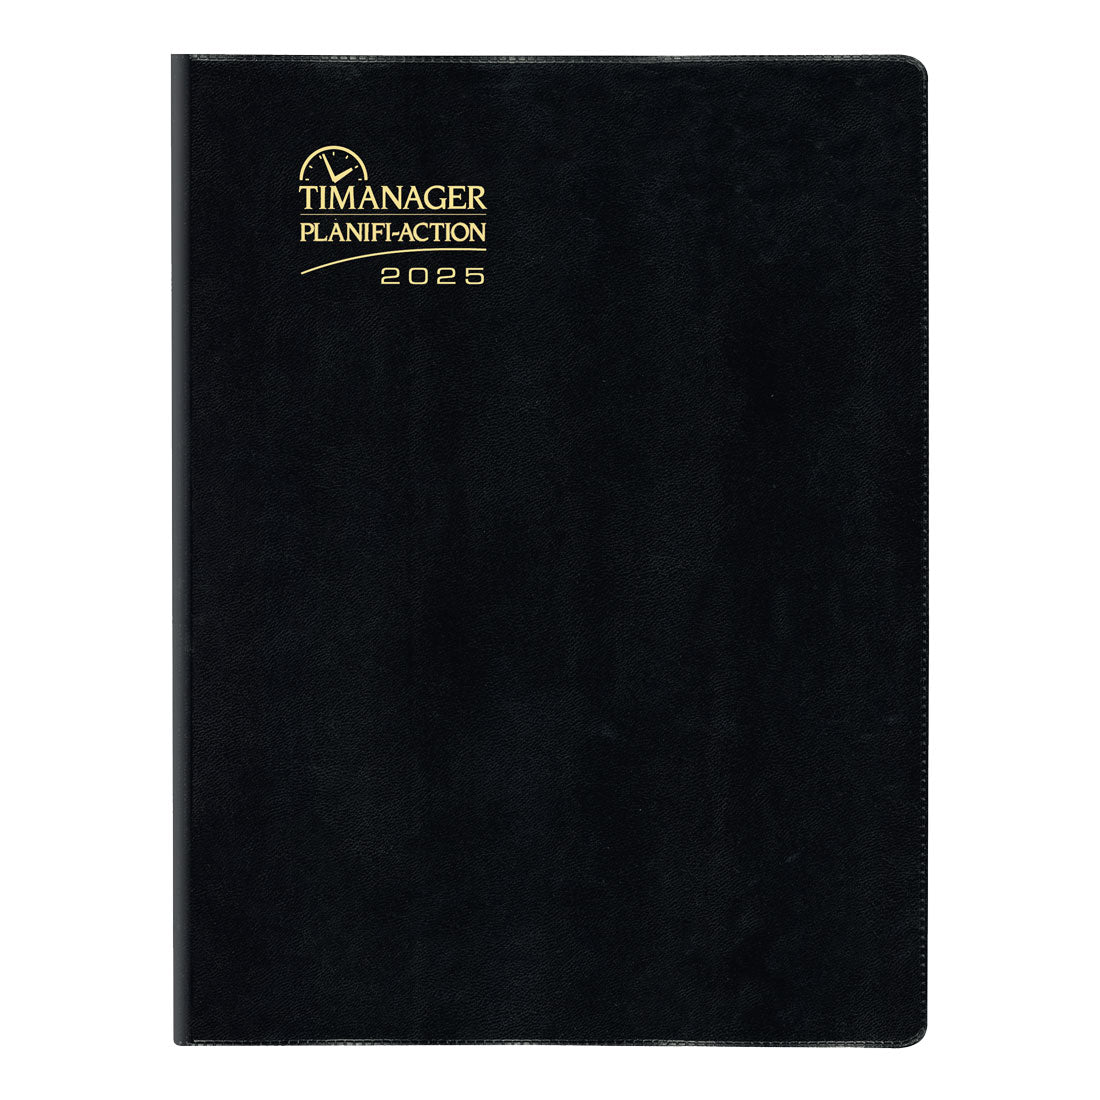 Timanager® Weekly Planner 2025, Bilingual, Black, C5933.81BT